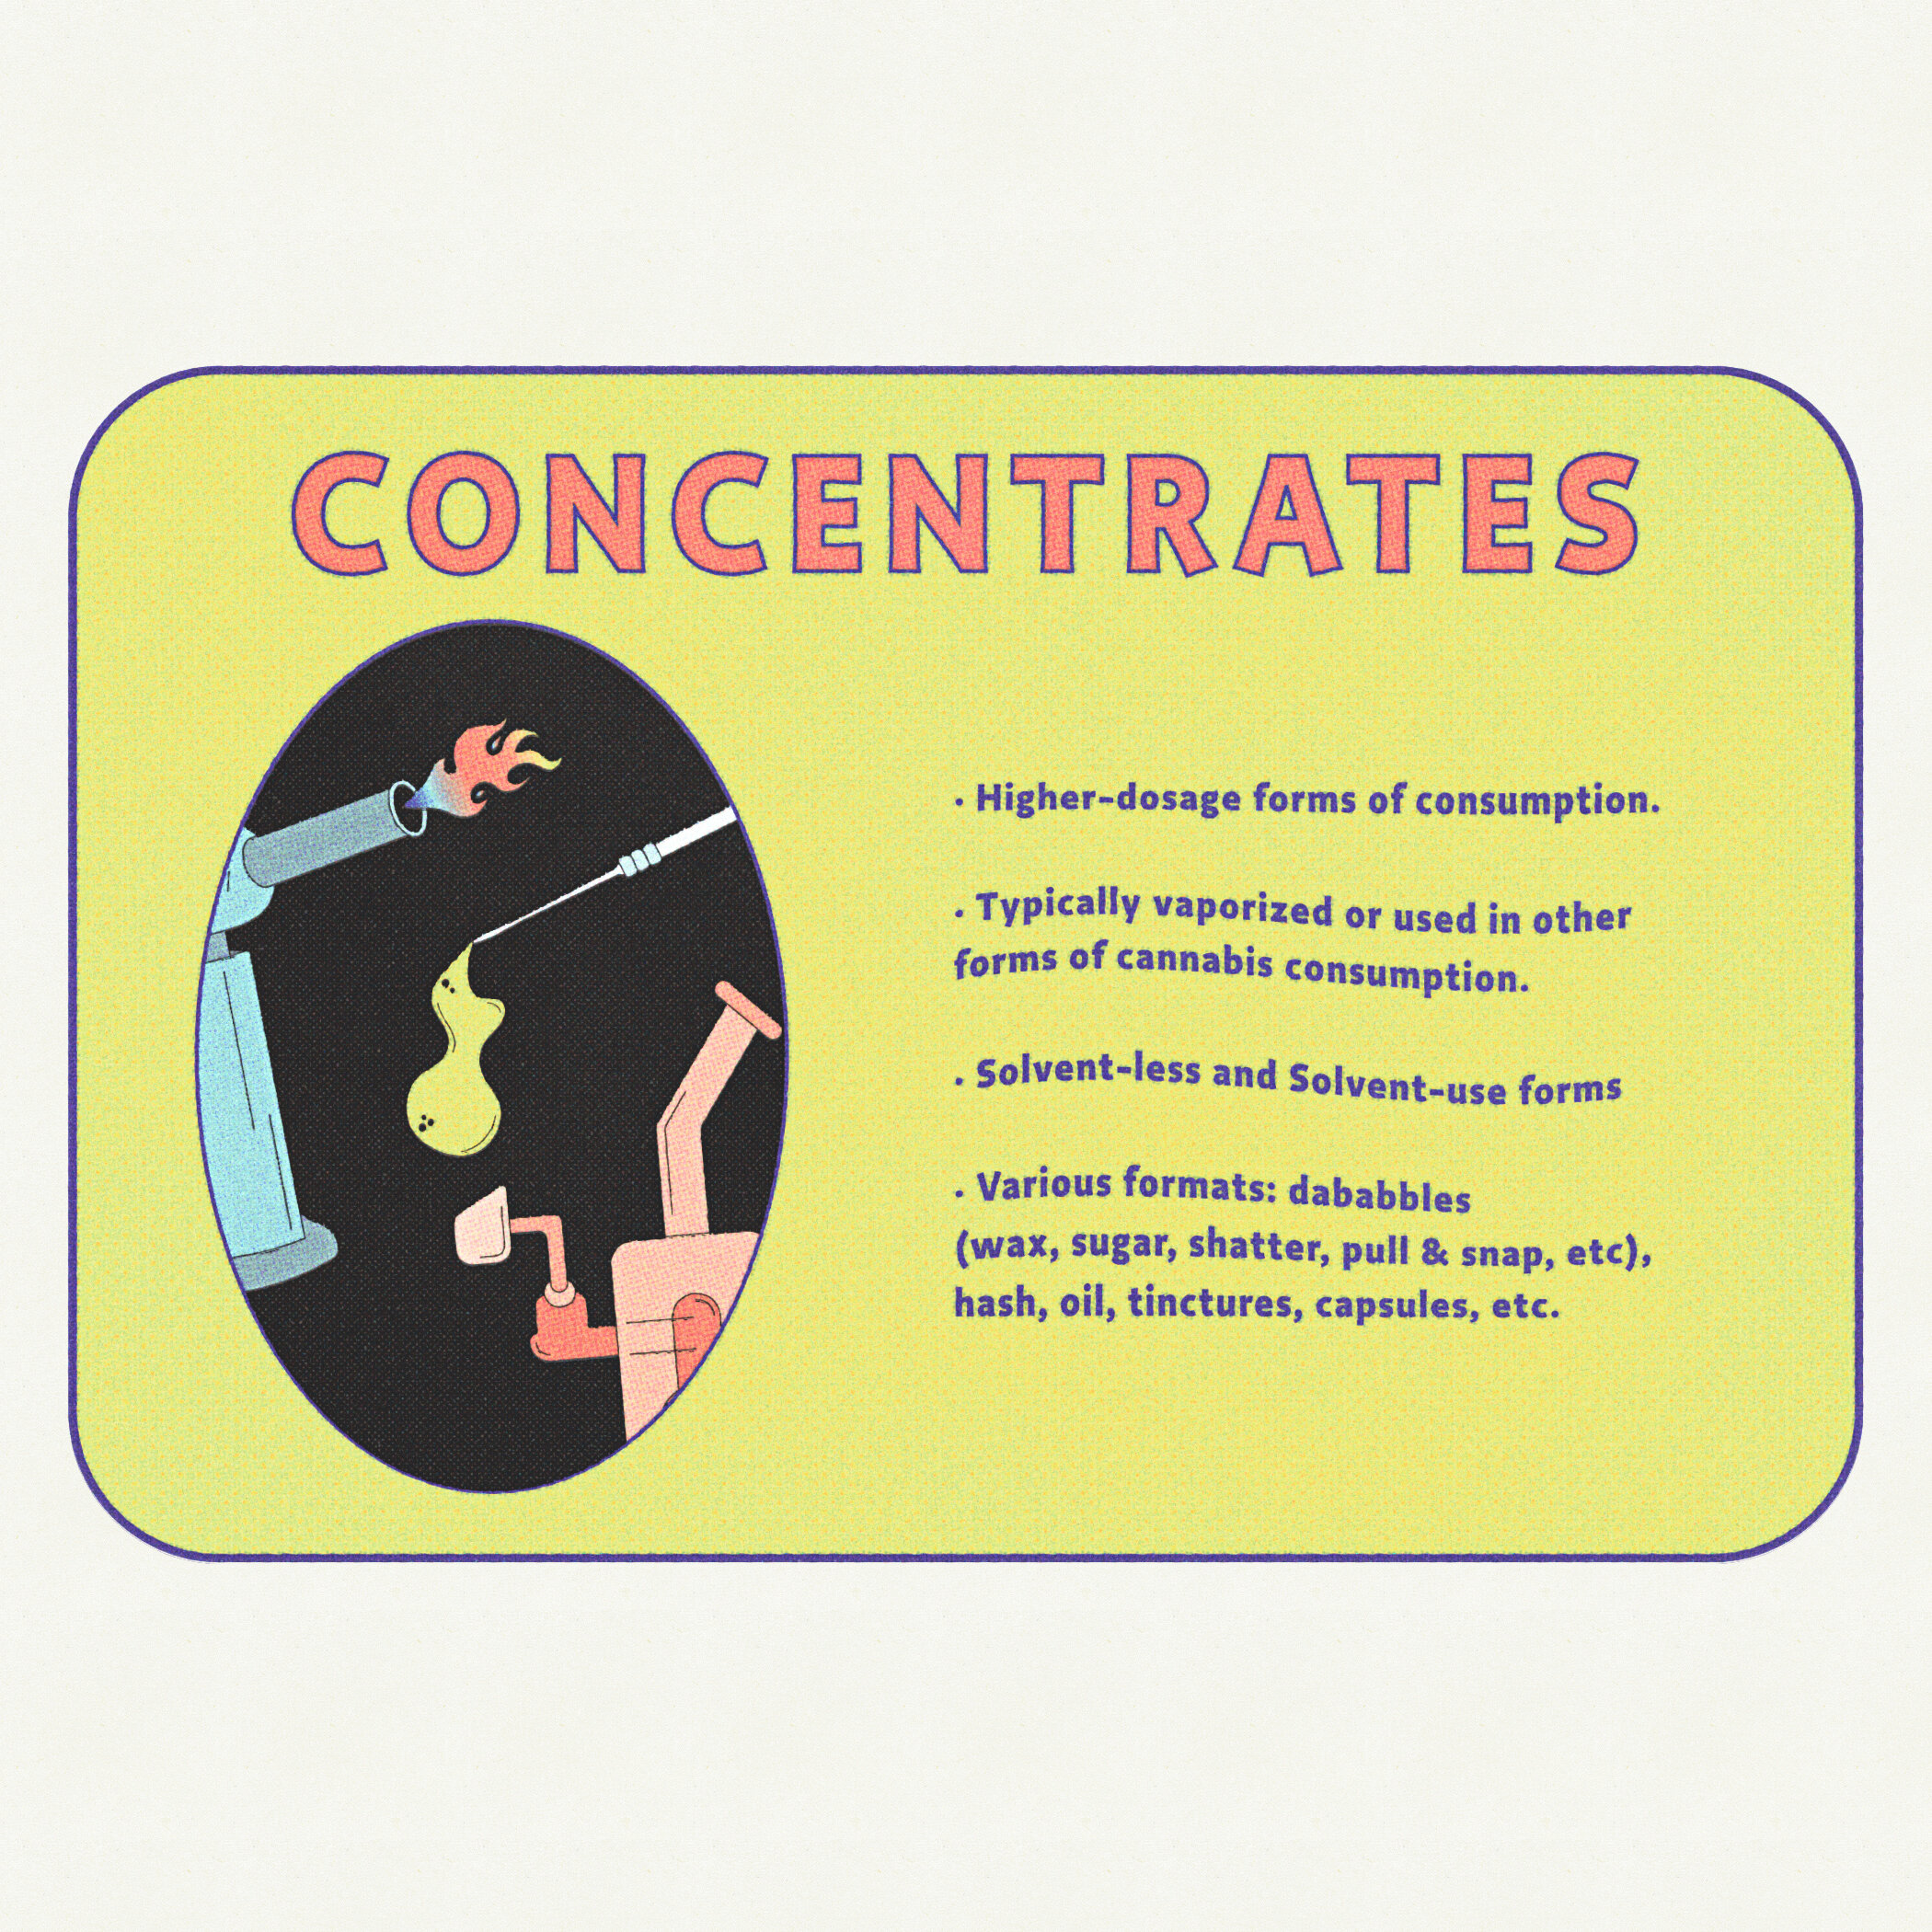 Article02-concentrates-back.jpg